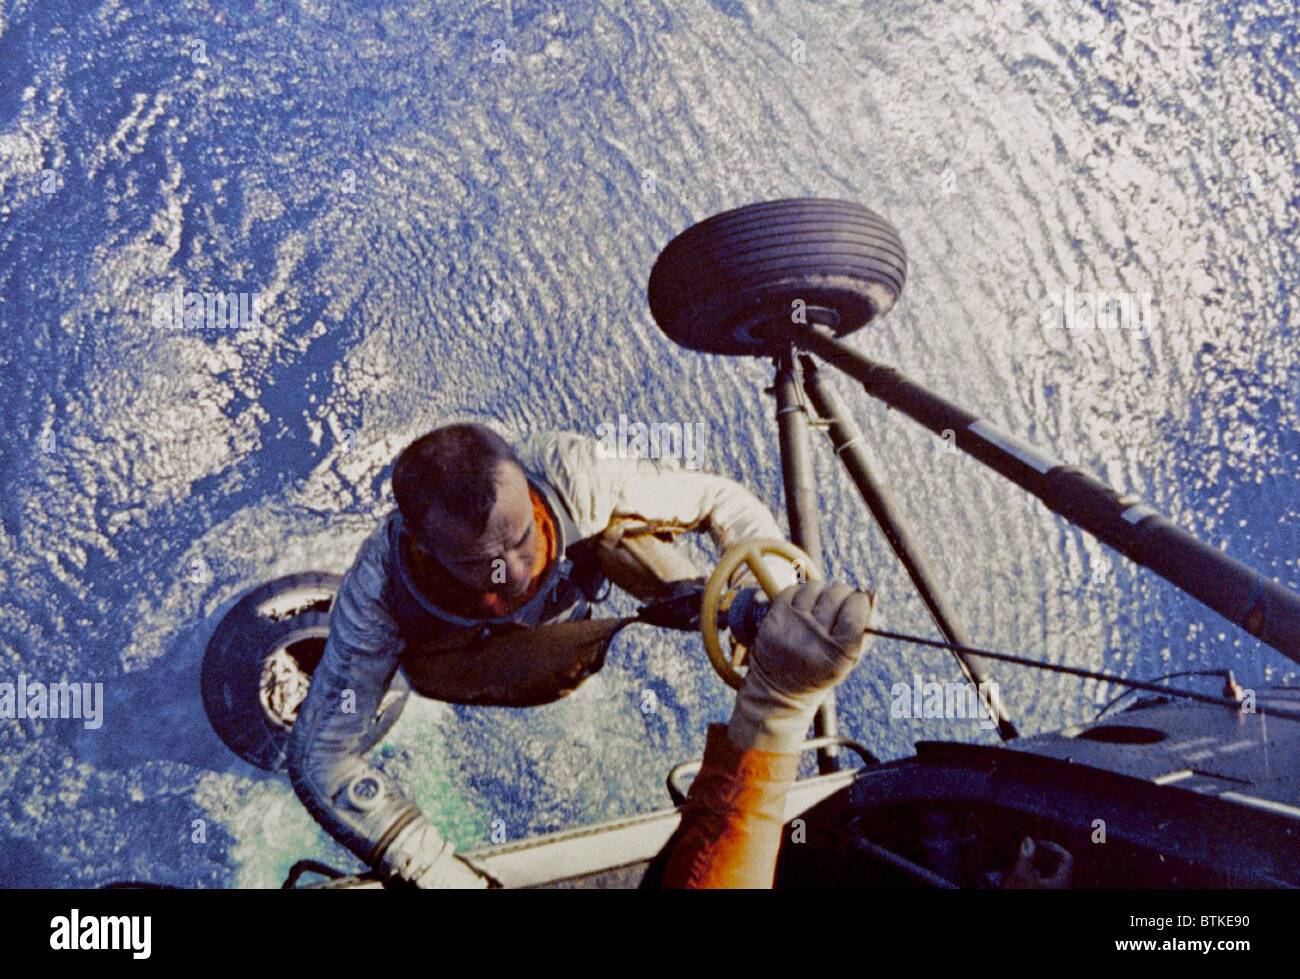 Astronaut Alan B. Shepard is hoisted aboard a U.S. Marine helicopter after splashdown of his Freedom 7 Mercury space capsule. Shepard was the first American, and second human after Russian Yuri Gargarin, to make a manned space flight. May 5, 1961. Stock Photo